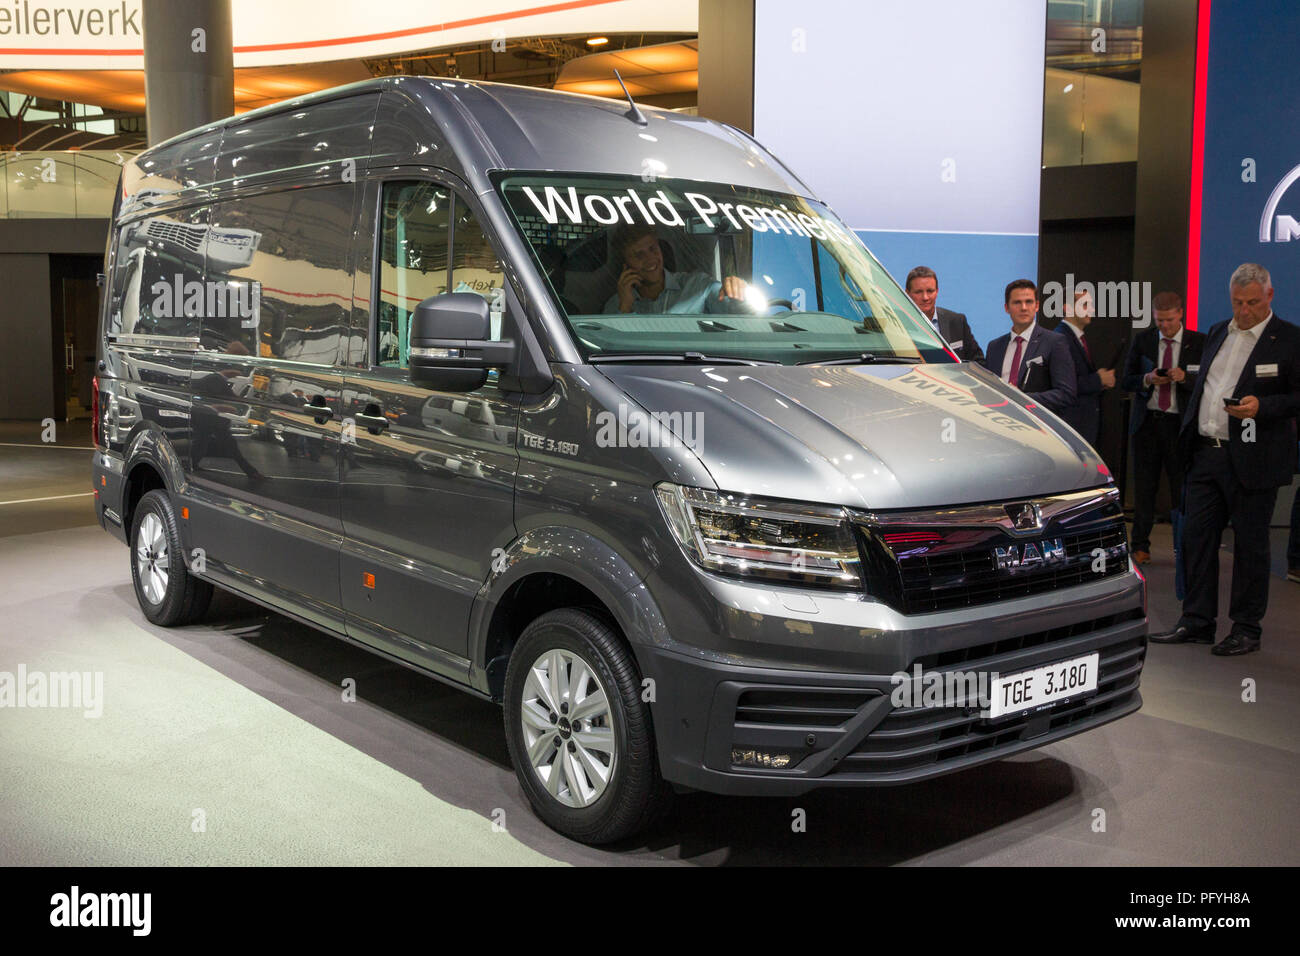 HANNOVER, GERMANY - SEP 21, 2016: MAN TGE 3.180 van showcased at the International Motor Show IAA for Commercial Vehicles. Stock Photo